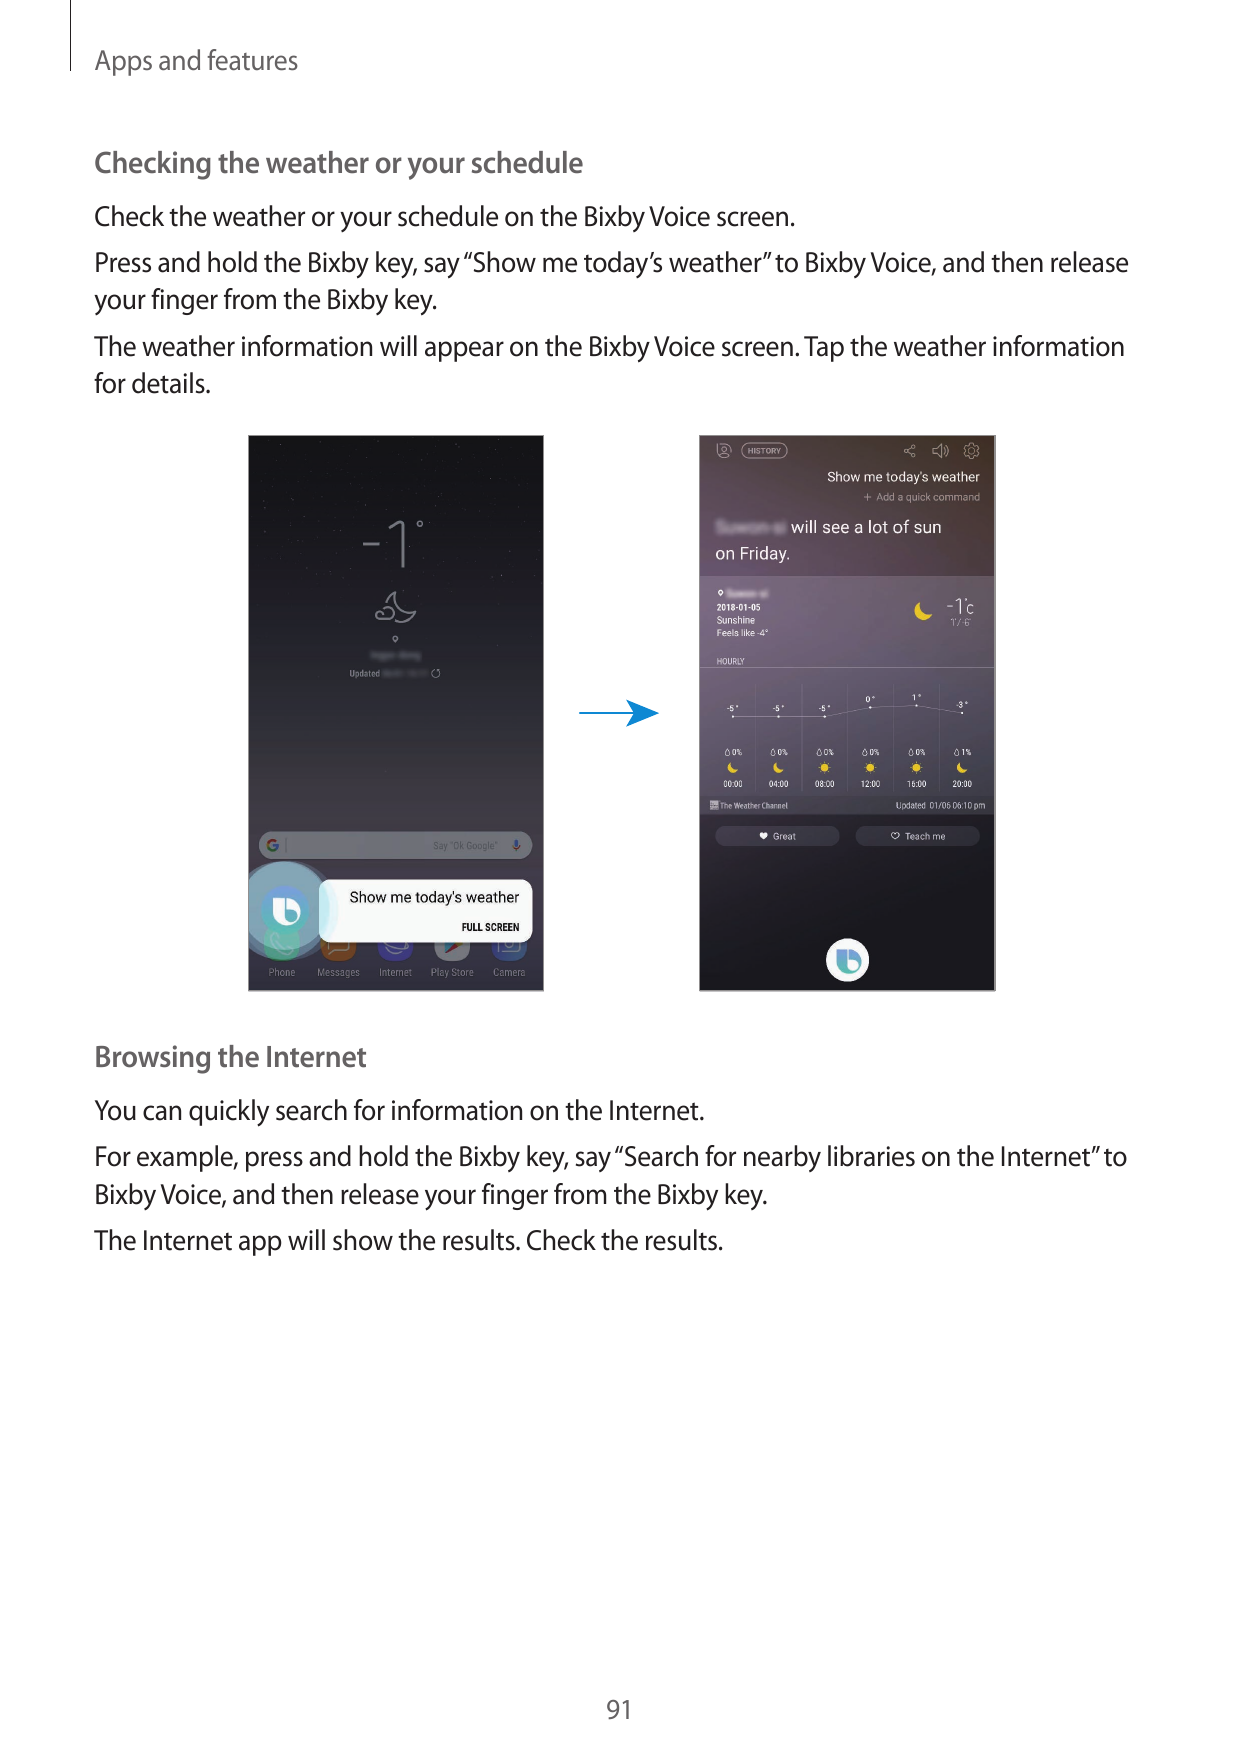 Apps and featuresChecking the weather or your scheduleCheck the weather or your schedule on the Bixby Voice screen.Press and hol